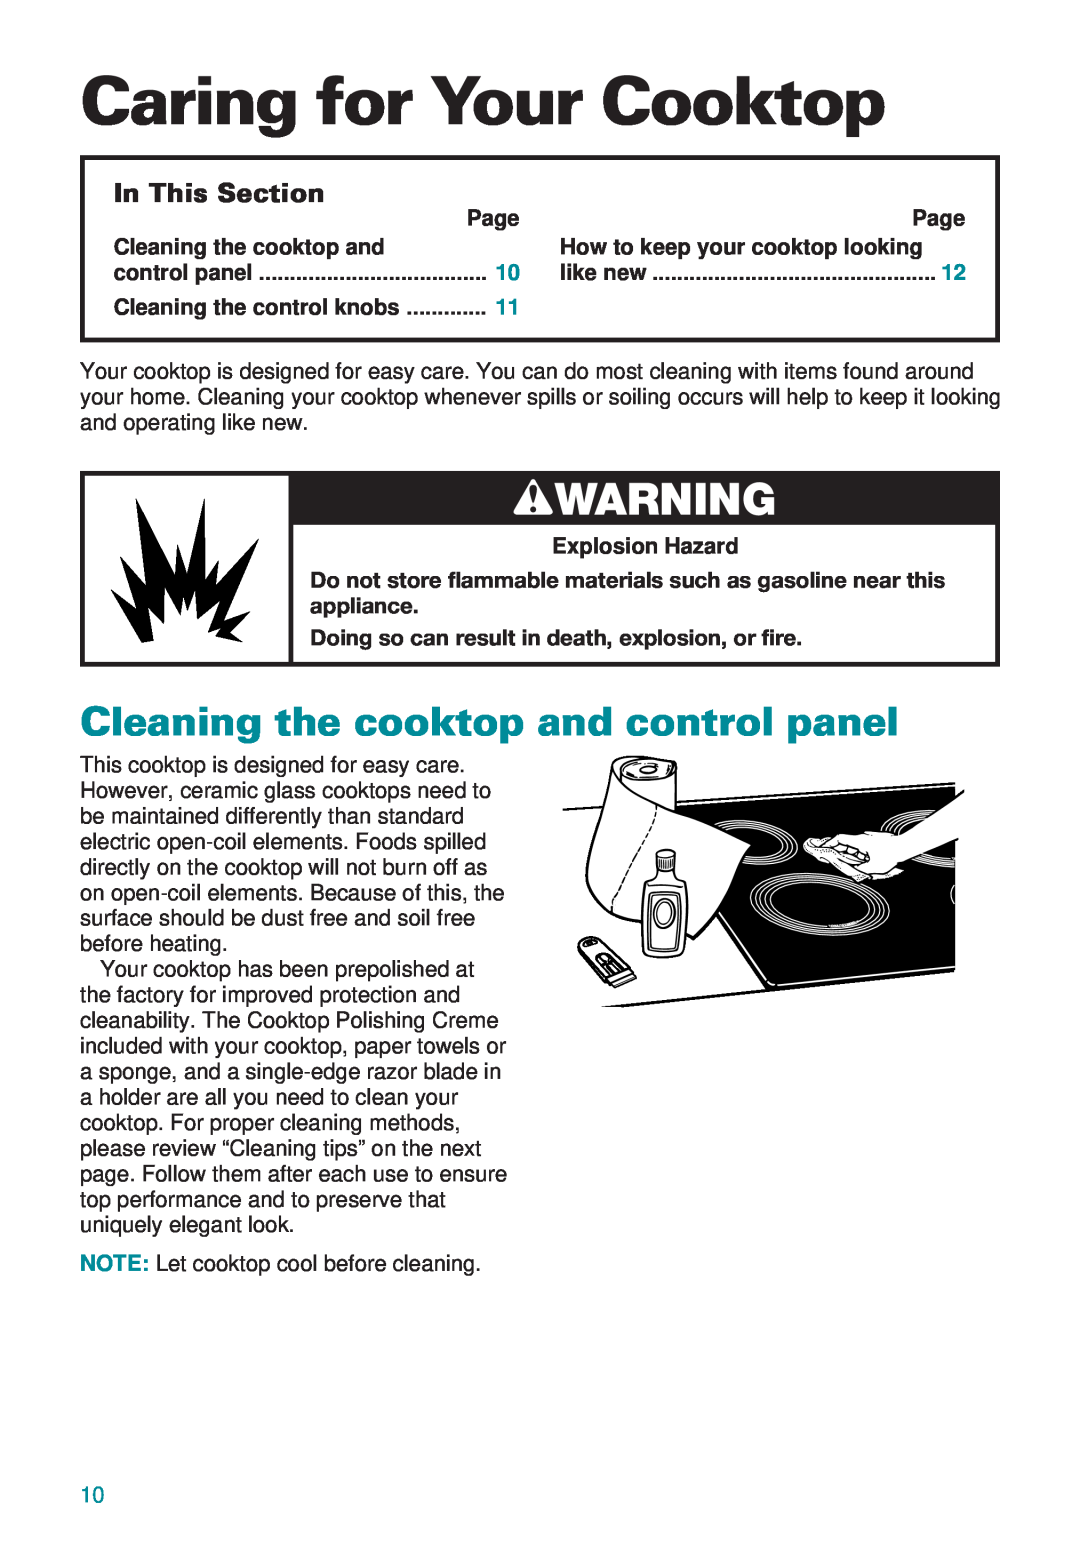 Whirlpool GJ8646XD, RC8600XB Caring for Your Cooktop, Cleaning the cooktop and control panel, wWARNING, In This Section 